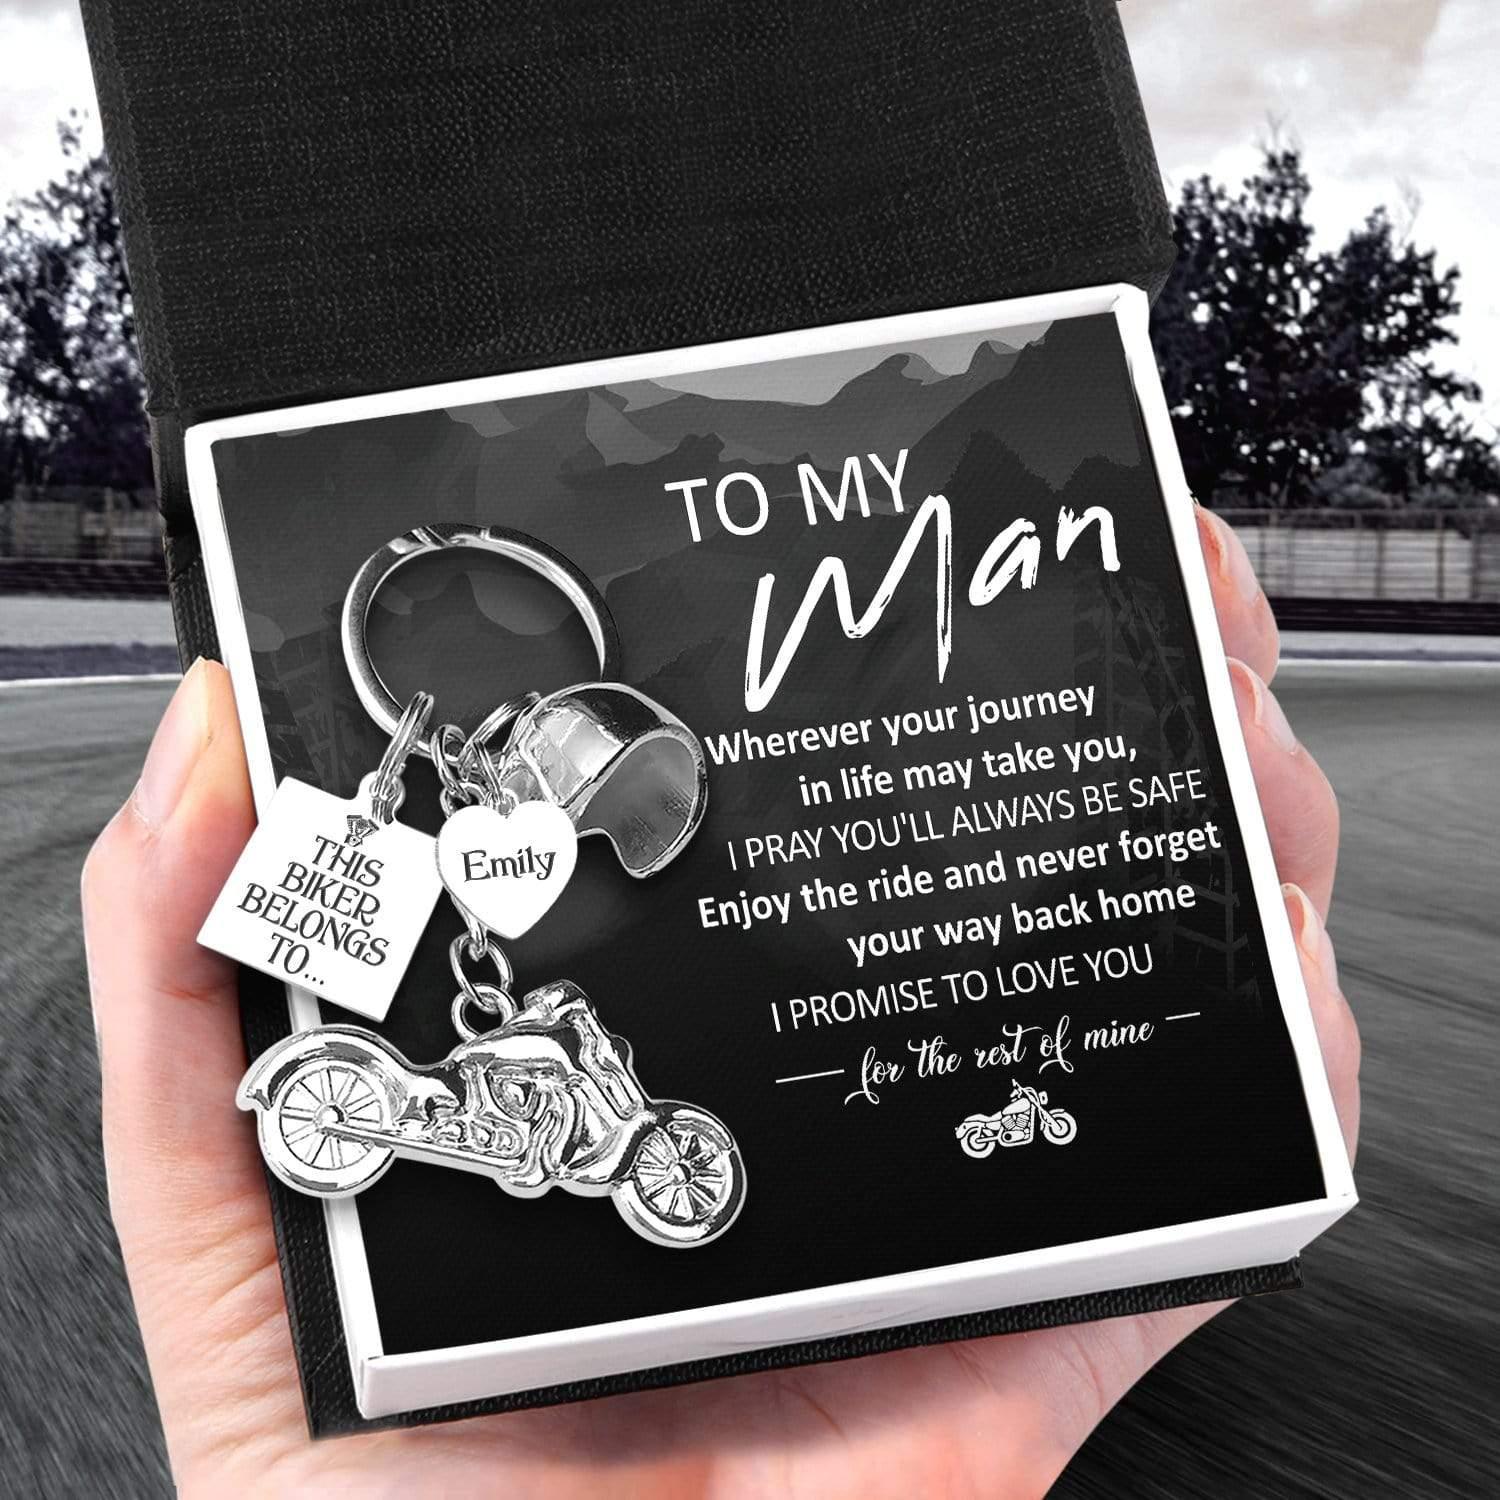 Personalized Classic Bike Keychain - Biker - To My Man - I Promise To Love You - Augkt26011 - Gifts Holder